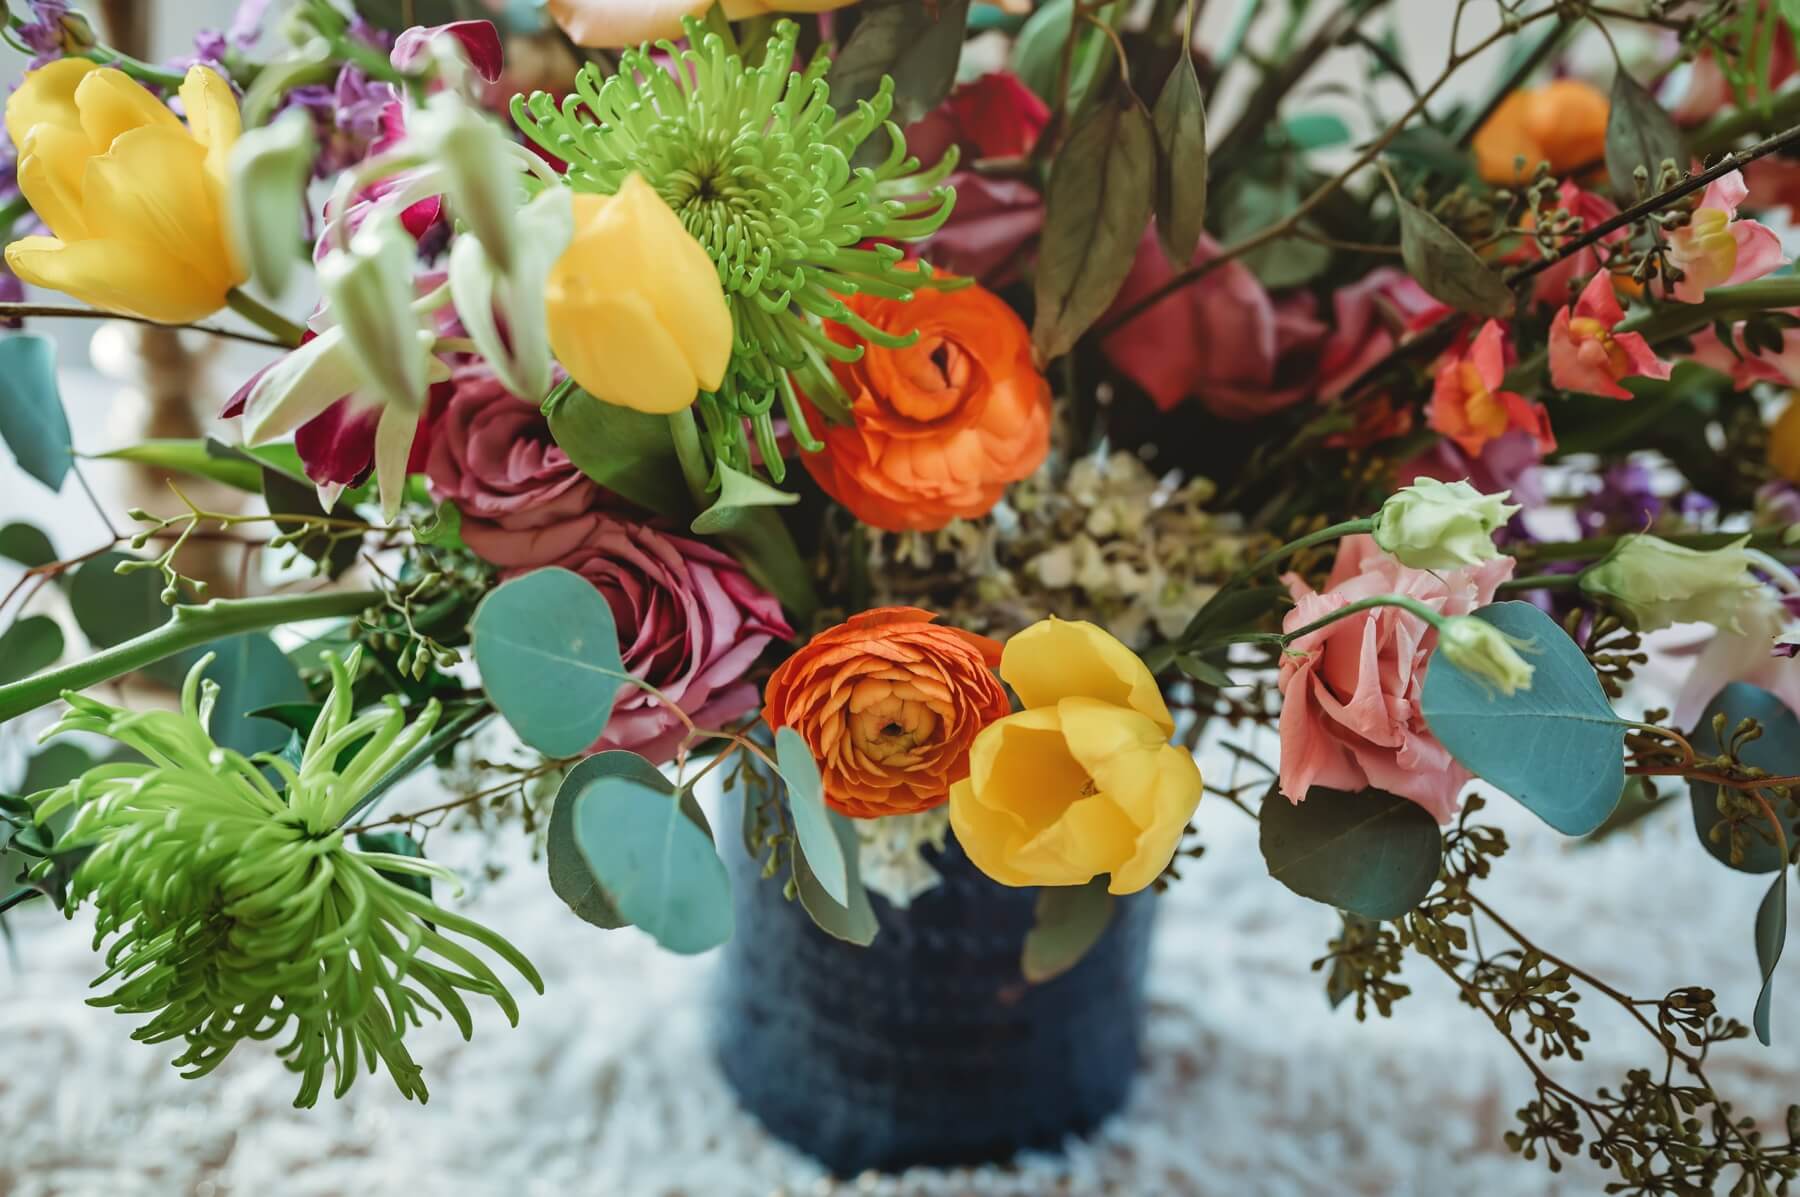 Colorful and whimsical centerpieces by Vine and Branches in post about wedding florists in Dallas